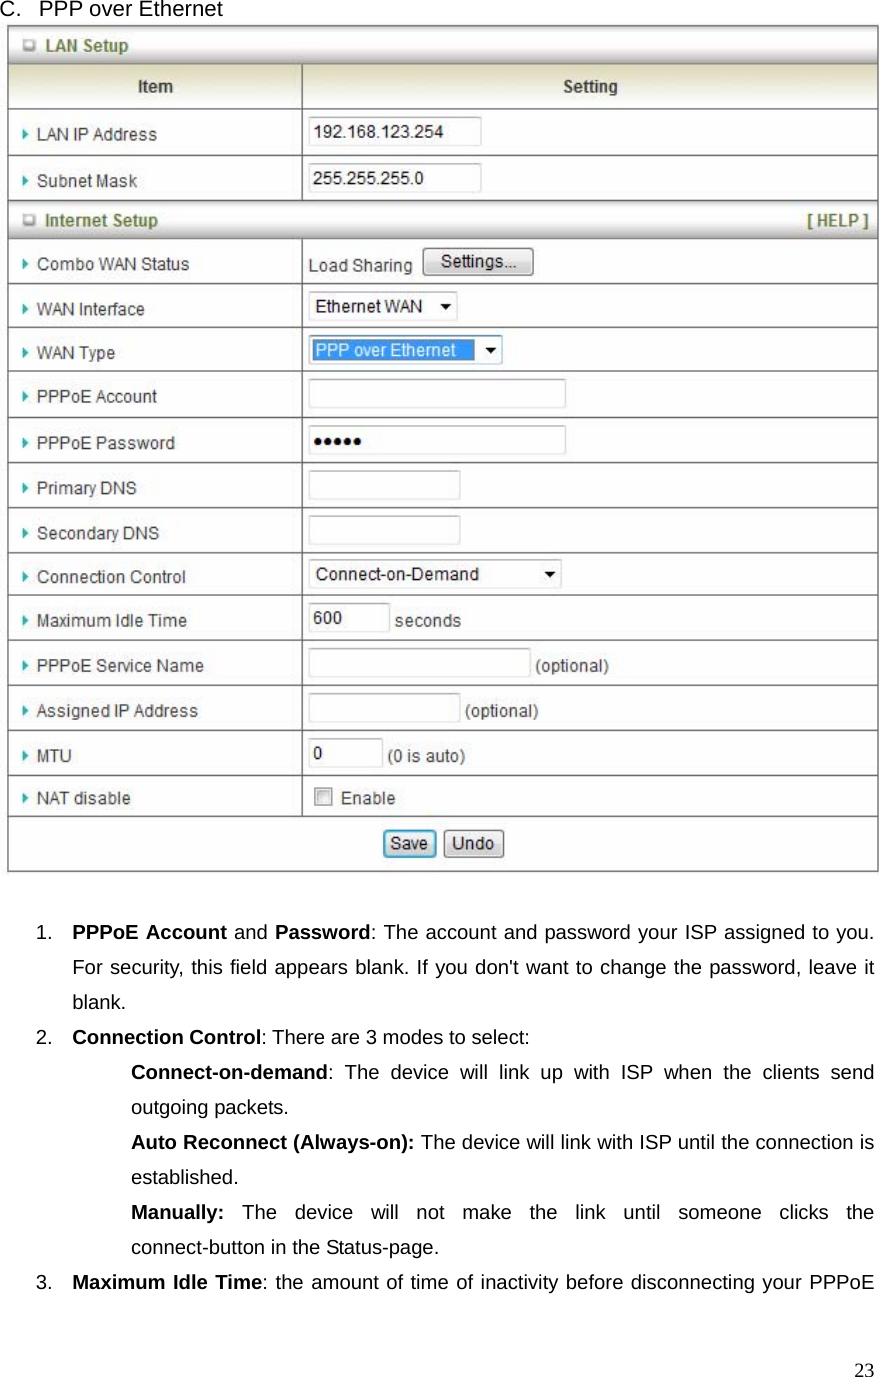  23C.  PPP over Ethernet    1.  PPPoE Account and Password: The account and password your ISP assigned to you. For security, this field appears blank. If you don&apos;t want to change the password, leave it blank.  2.  Connection Control: There are 3 modes to select:    Connect-on-demand: The device will link up with ISP when the clients send outgoing packets.    Auto Reconnect (Always-on): The device will link with ISP until the connection is established.   Manually: The device will not make the link until someone clicks the connect-button in the Status-page. 3.  Maximum Idle Time: the amount of time of inactivity before disconnecting your PPPoE 